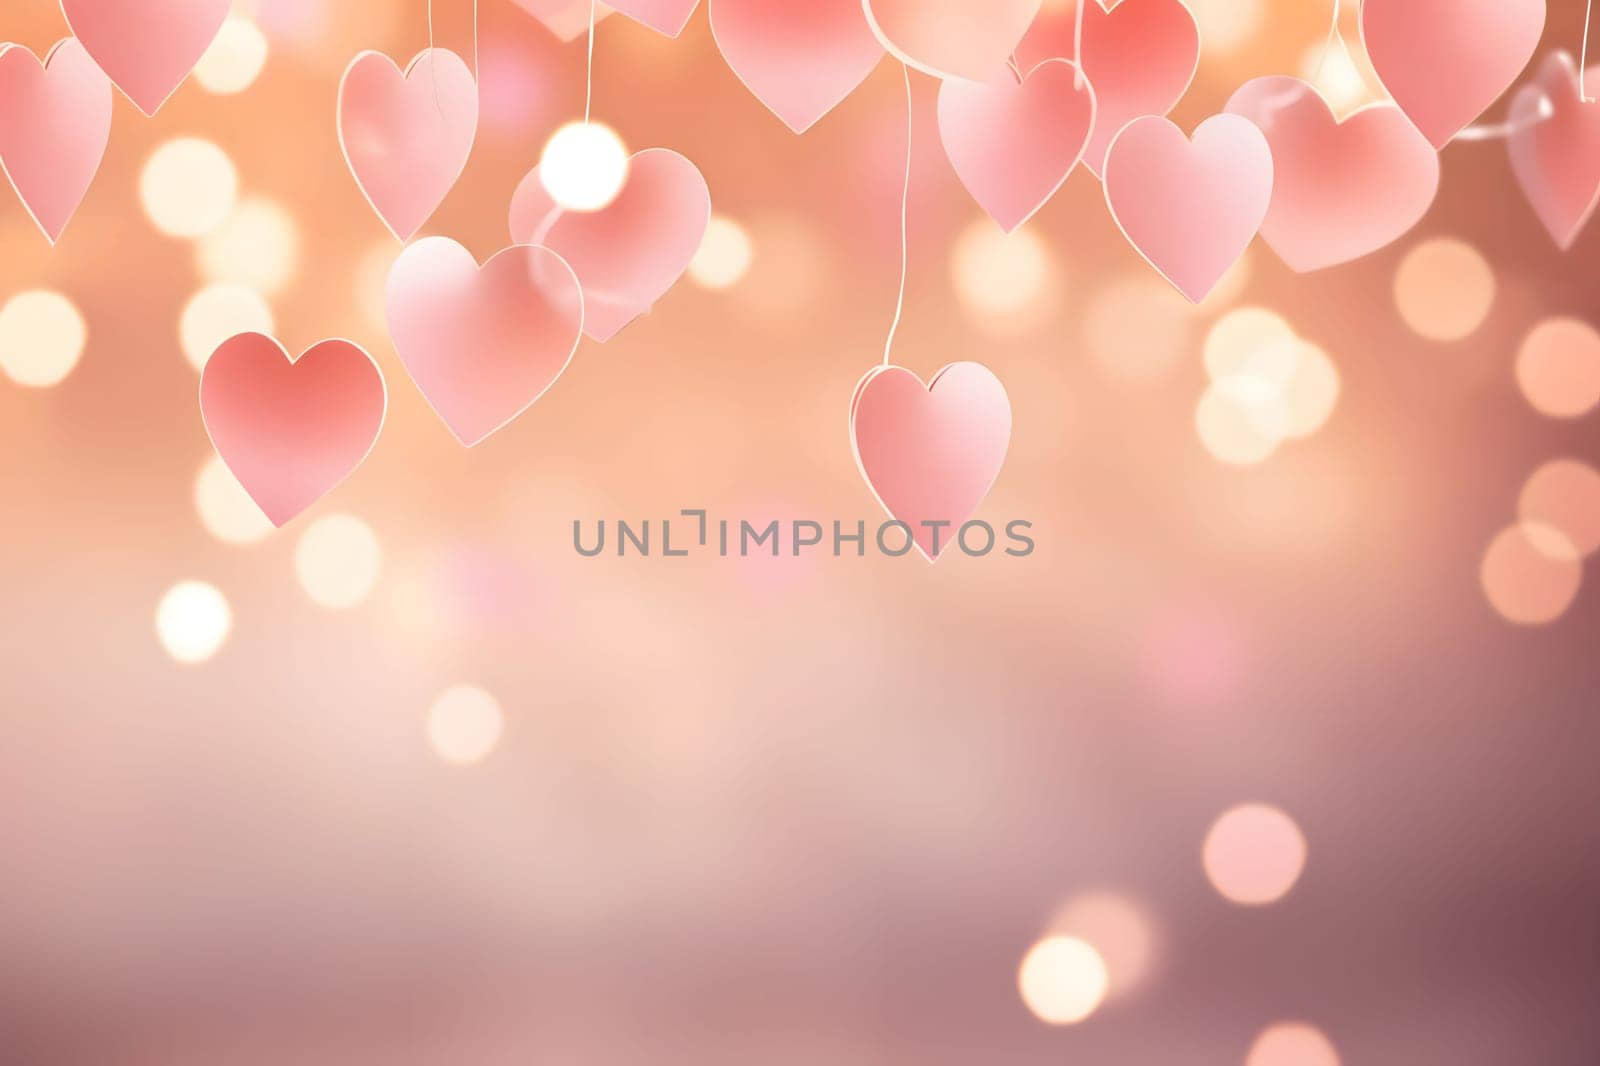 Colorful: pink and white hearts on a light background, confetti,New Year's Eve bright background, banner with space for your own content. Blank space for the inscription.